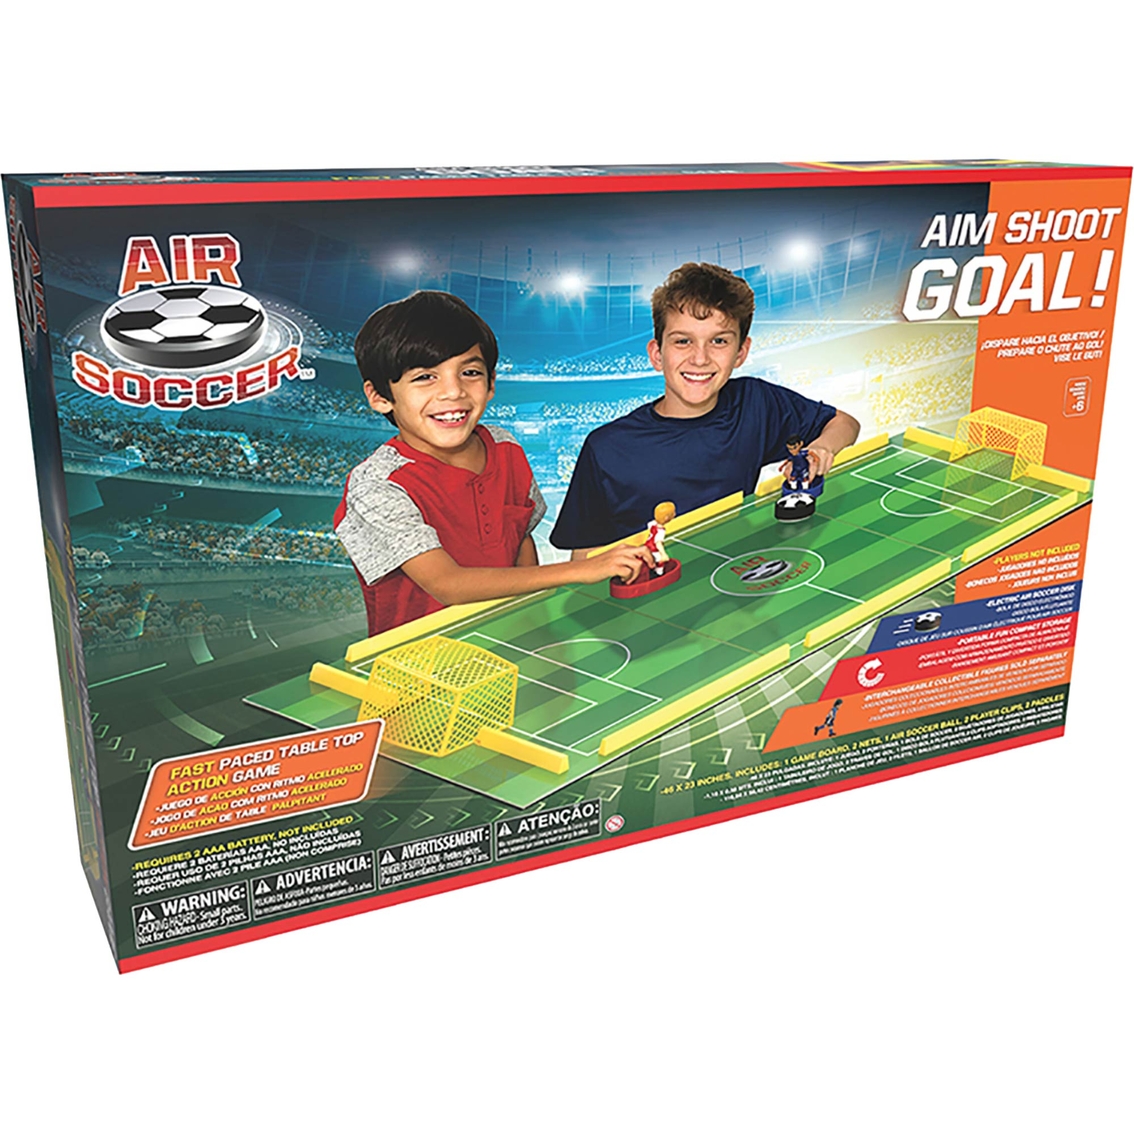 Maccabi Art Air Soccer Tabletop Board Game - Image 5 of 5